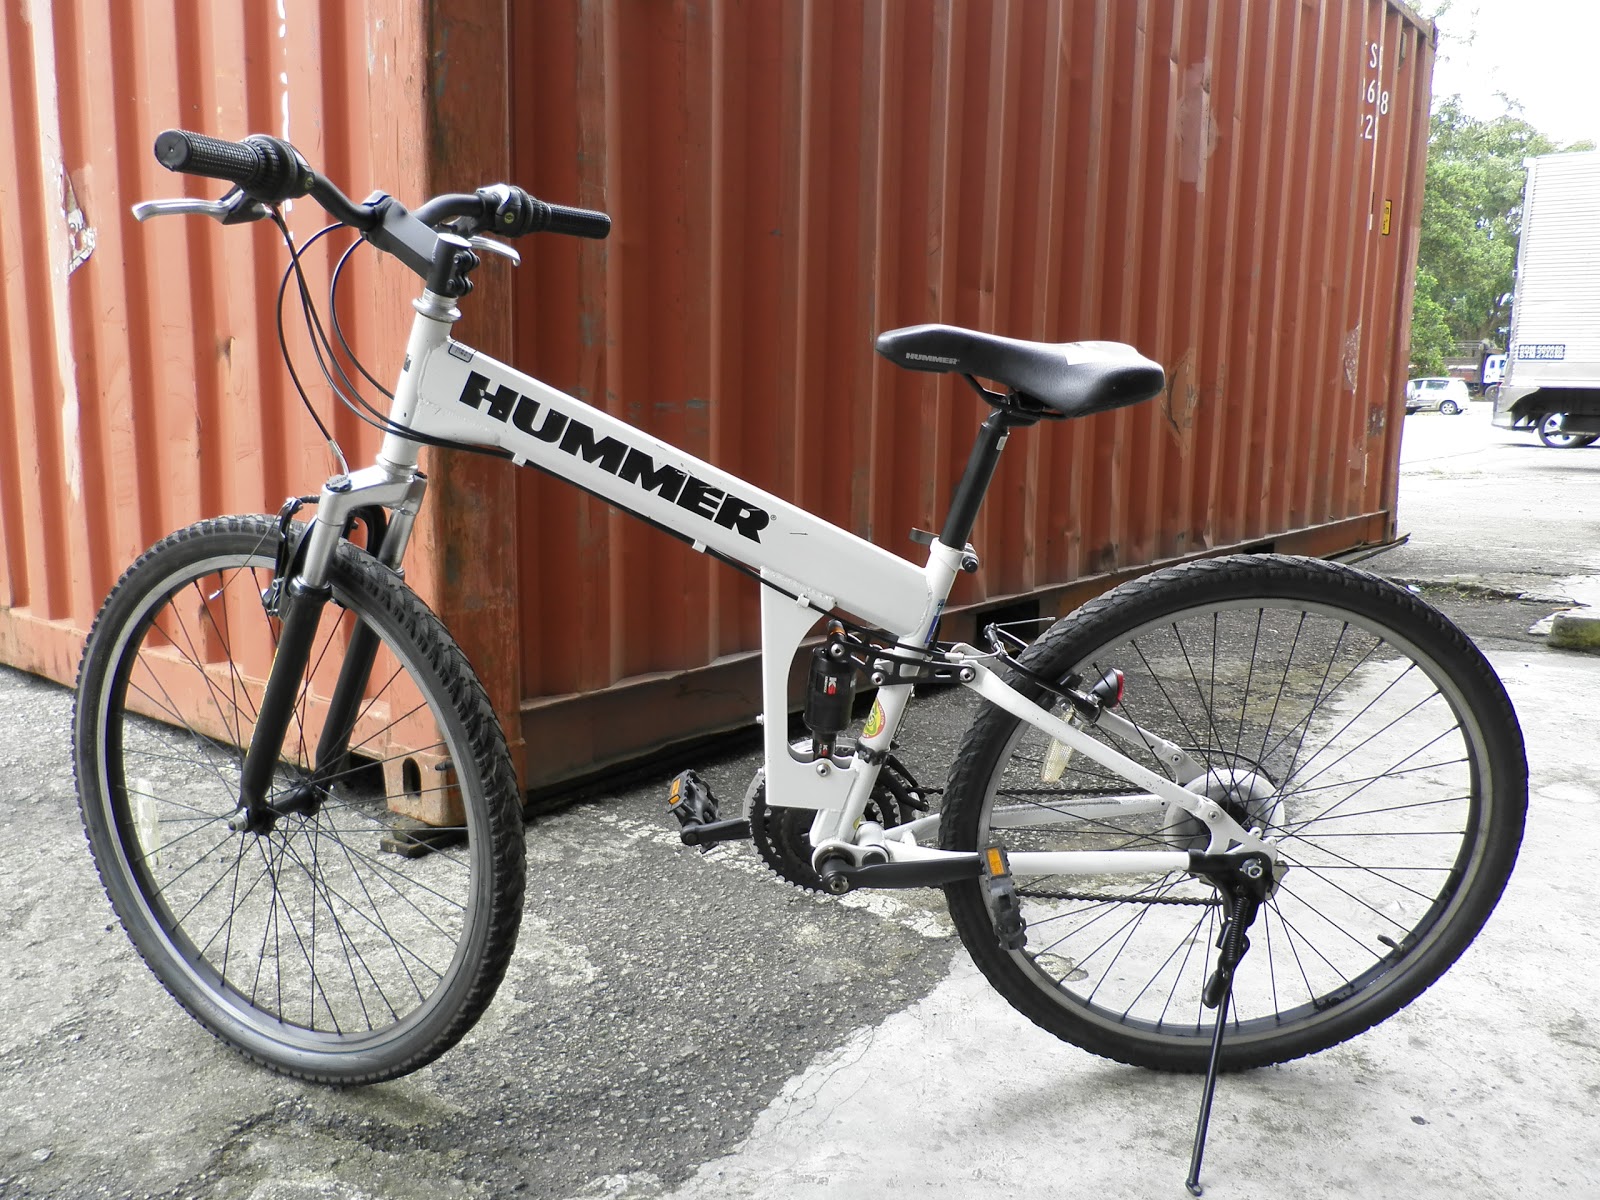 this bike brands is hummer this bike come with 6x3 speed shimano ...